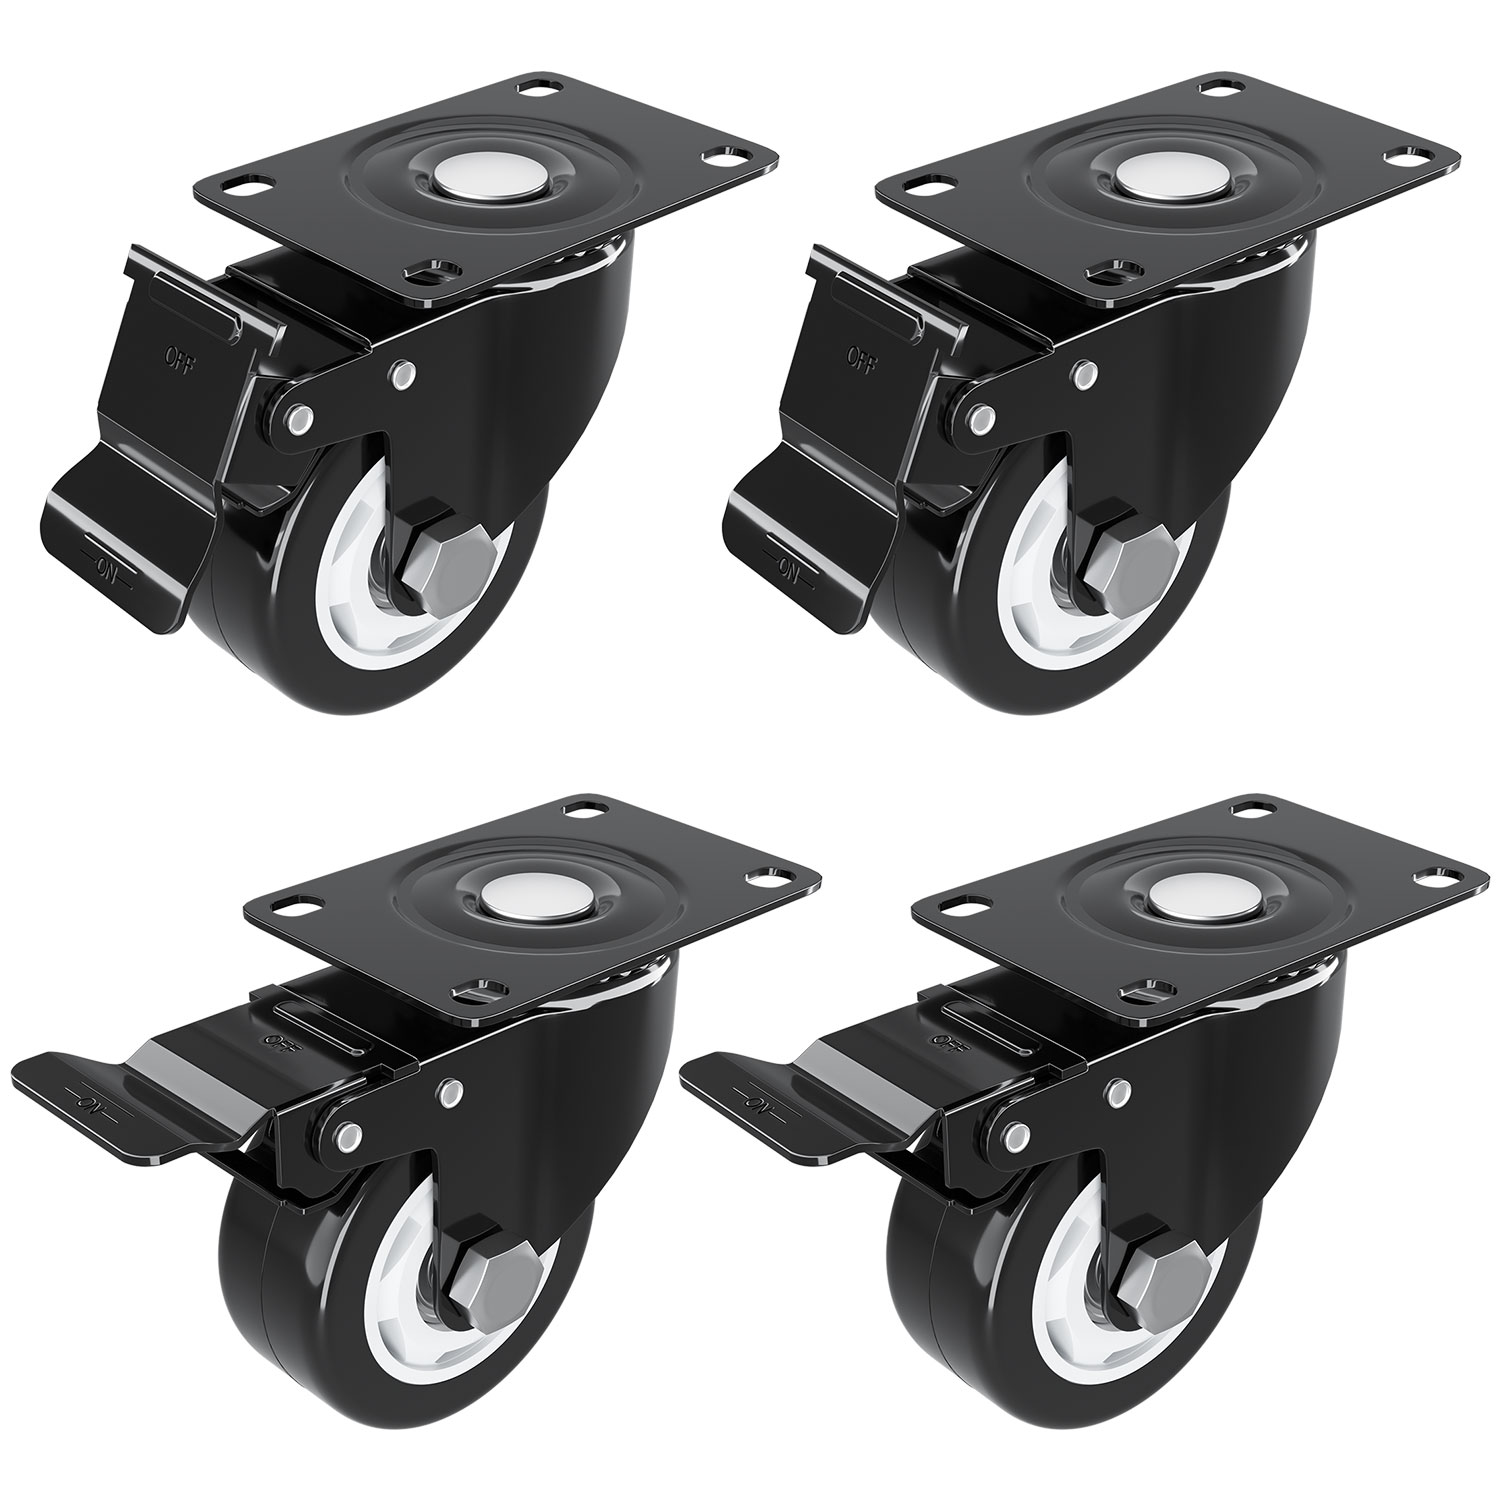 3 inch Caster Wheel with Brake Locking and NO Noise Rubber Wheels, Heavy Duty Swivel Plate Caster for DIY Cart Dolly, Support 1000 lbs, 4 Pack